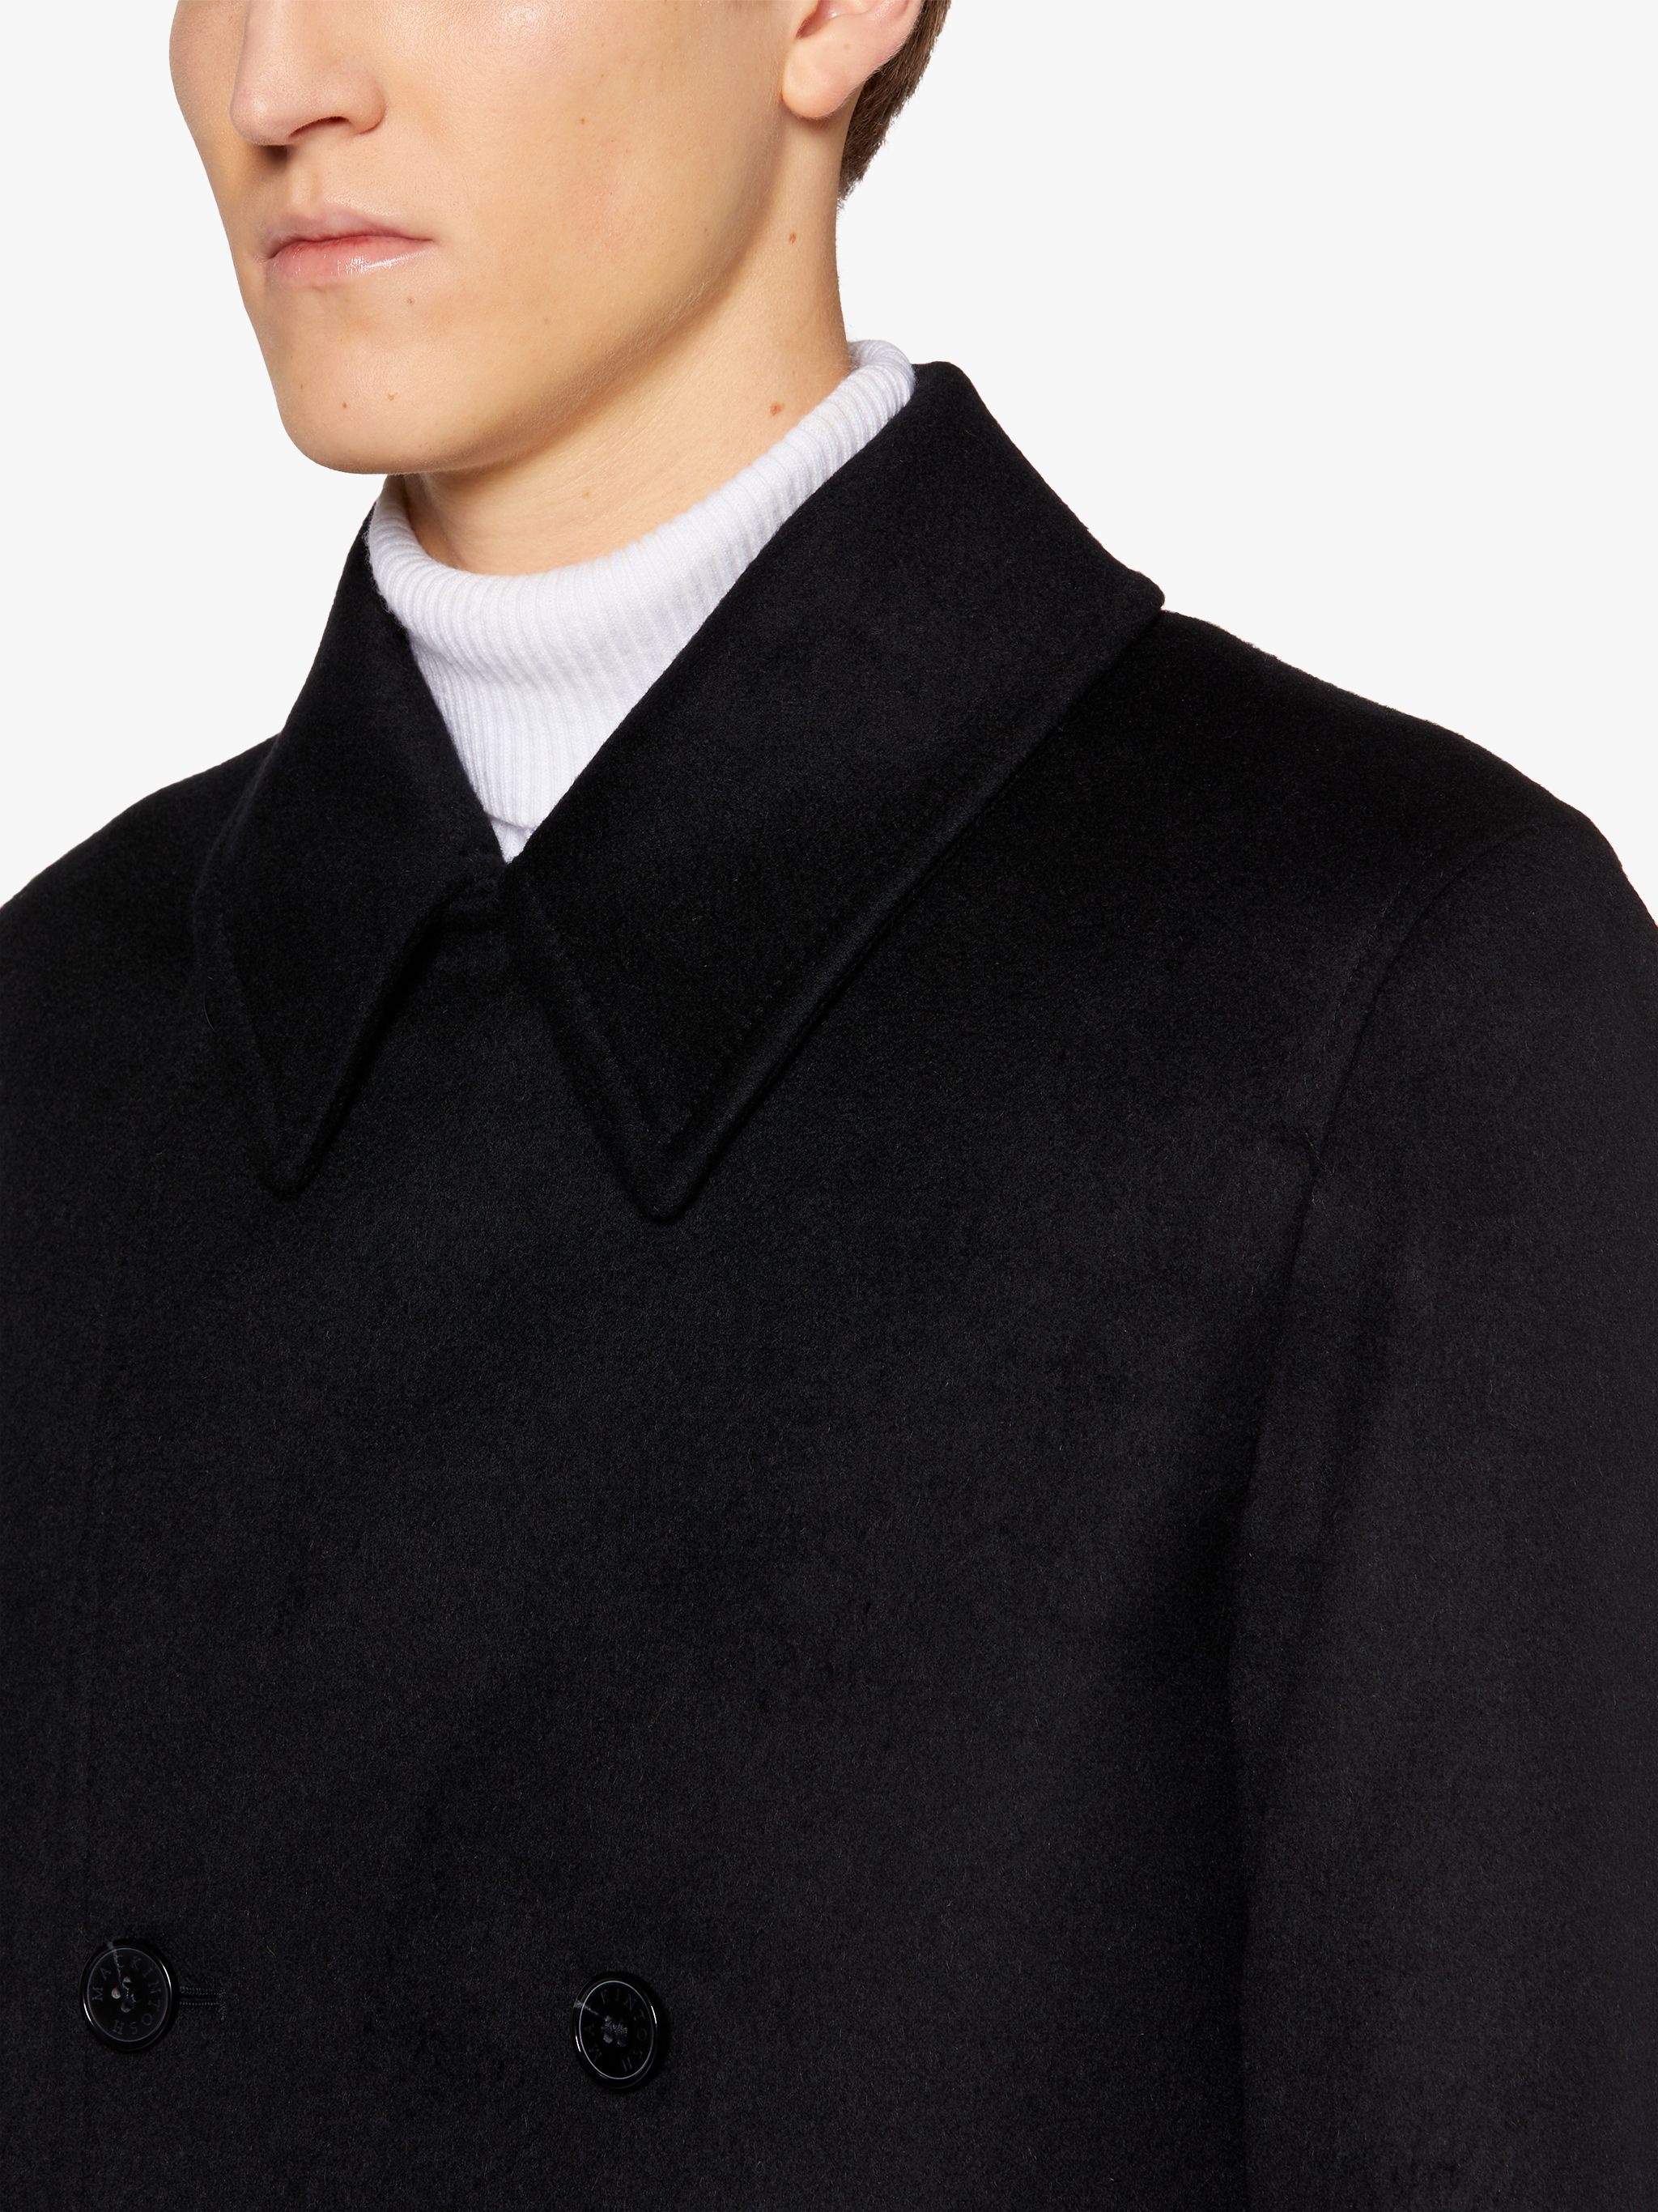 REDFORD BLACK WOOL & CASHMERE DOUBLE BREASTED COAT | GM-1101 - 5